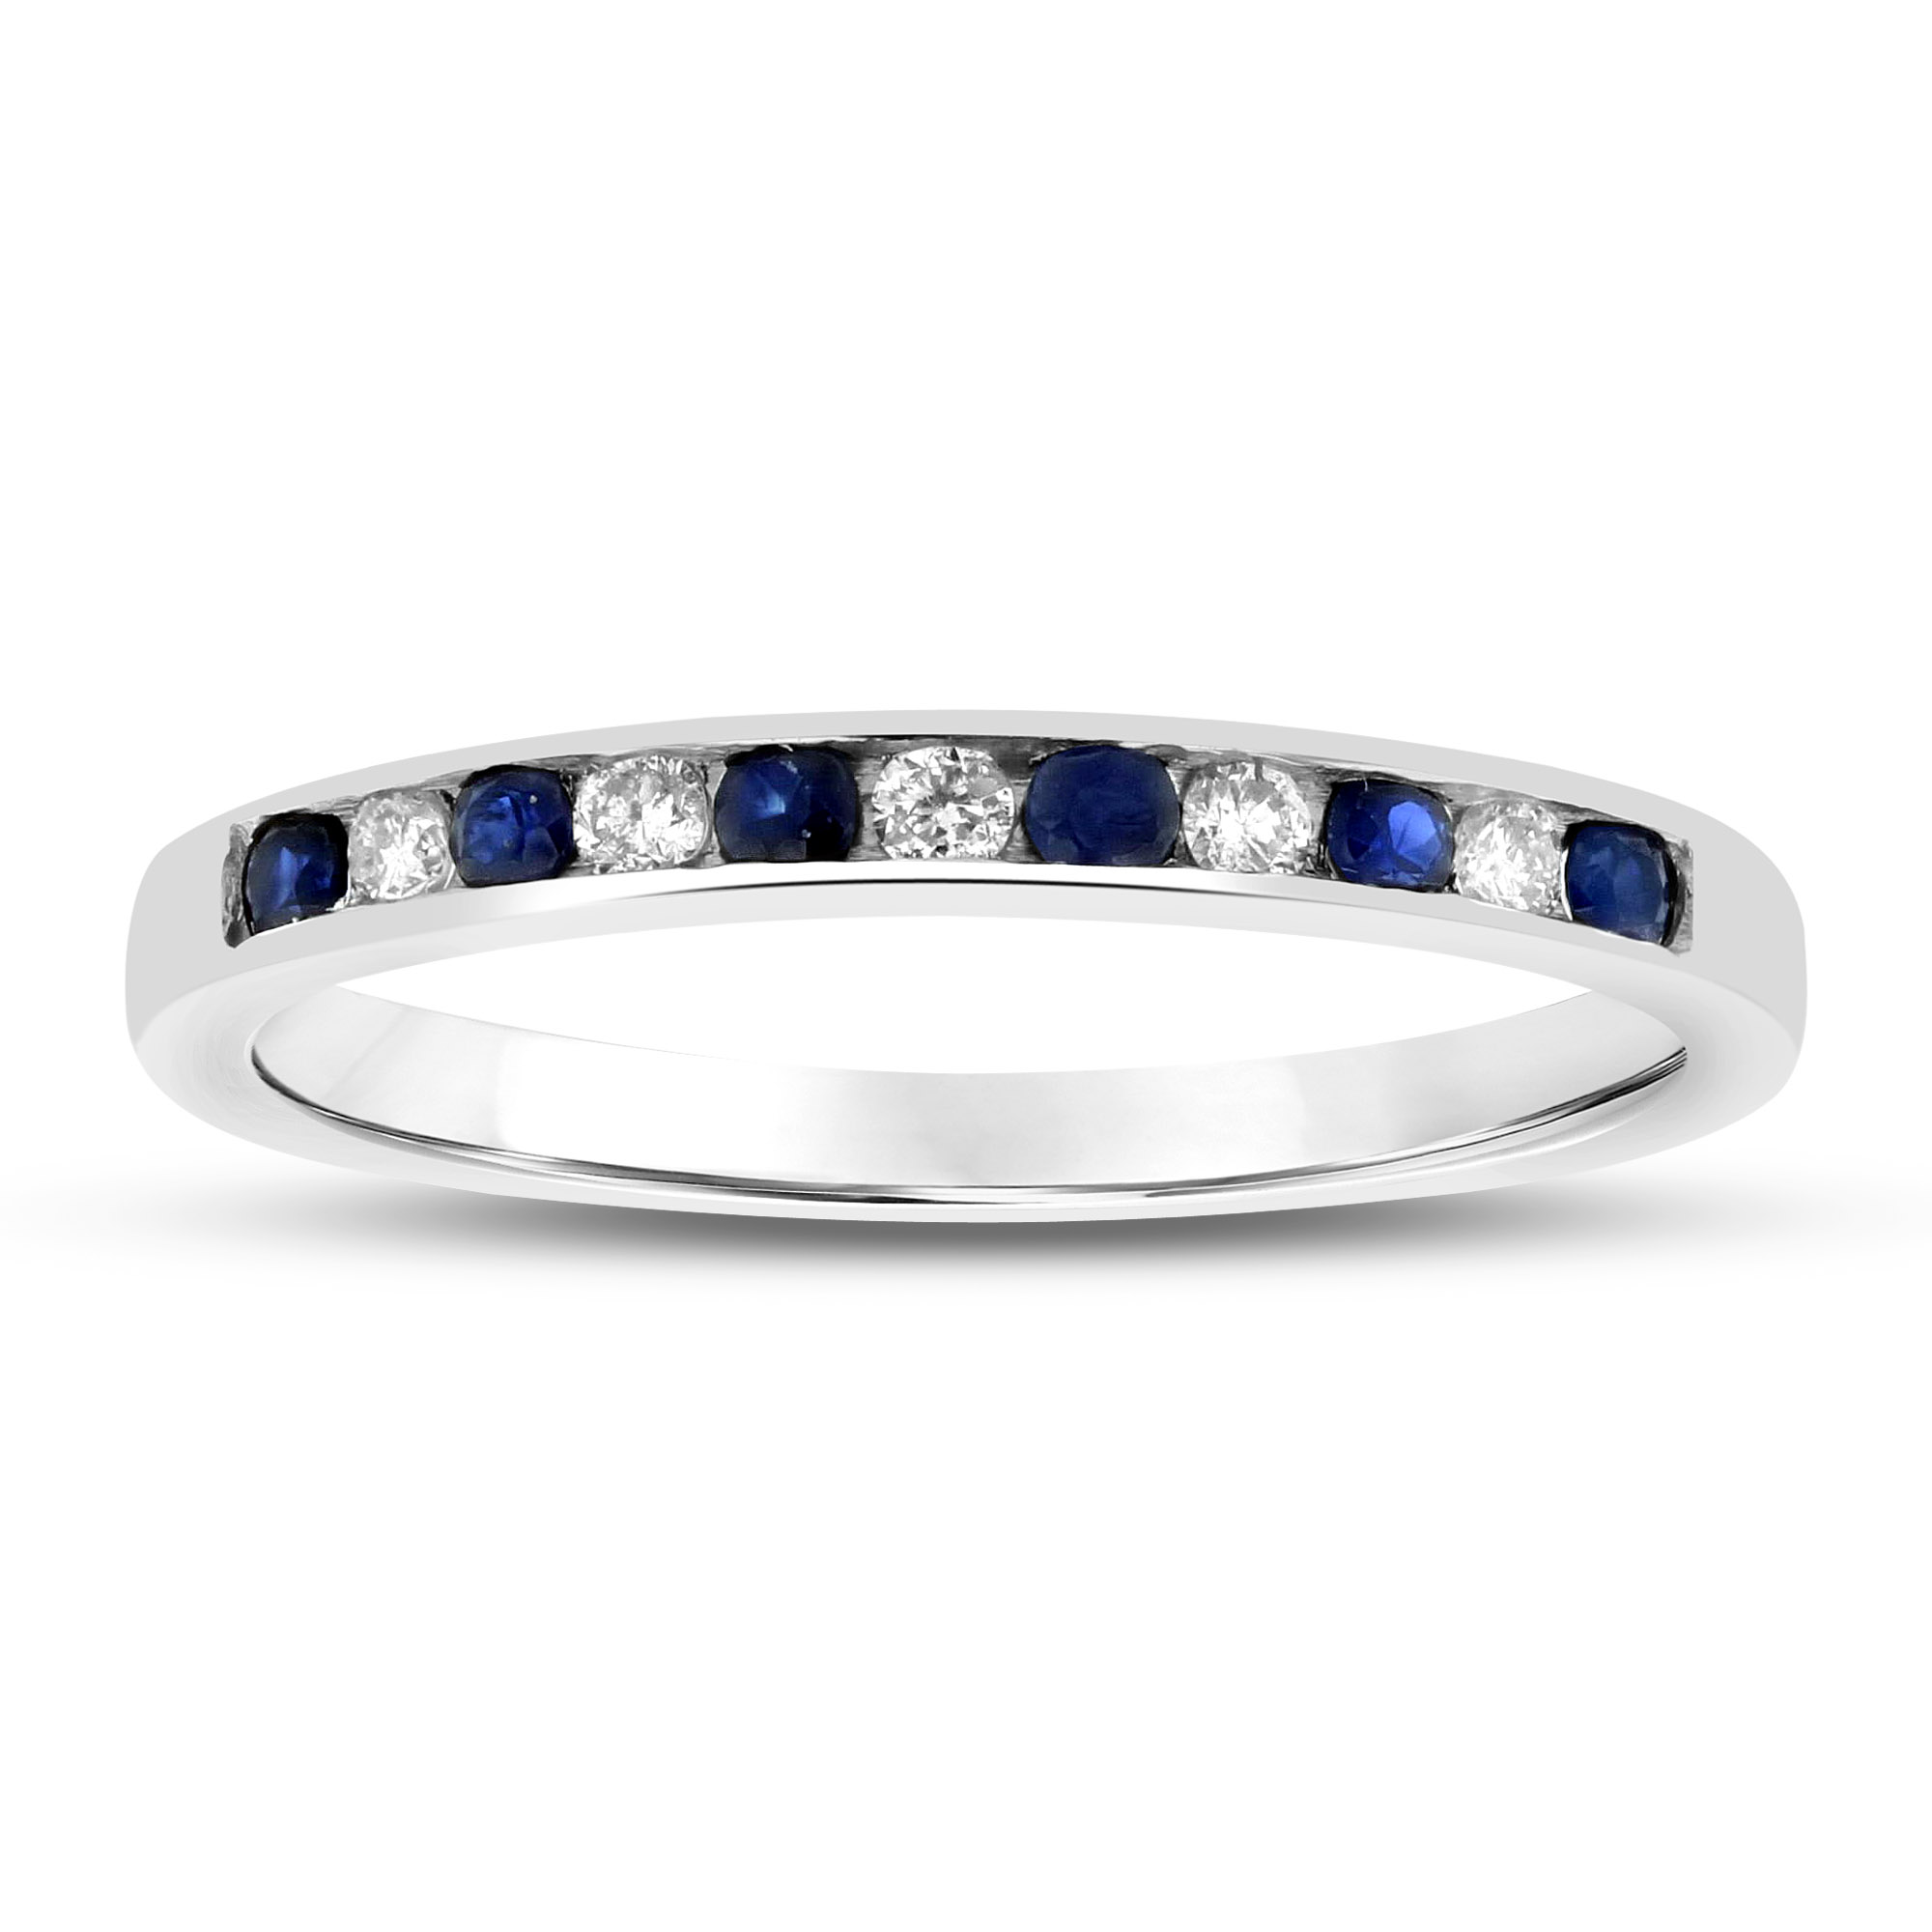 View 0.27ctw Diamond and Sapphire Band in 14k Gold